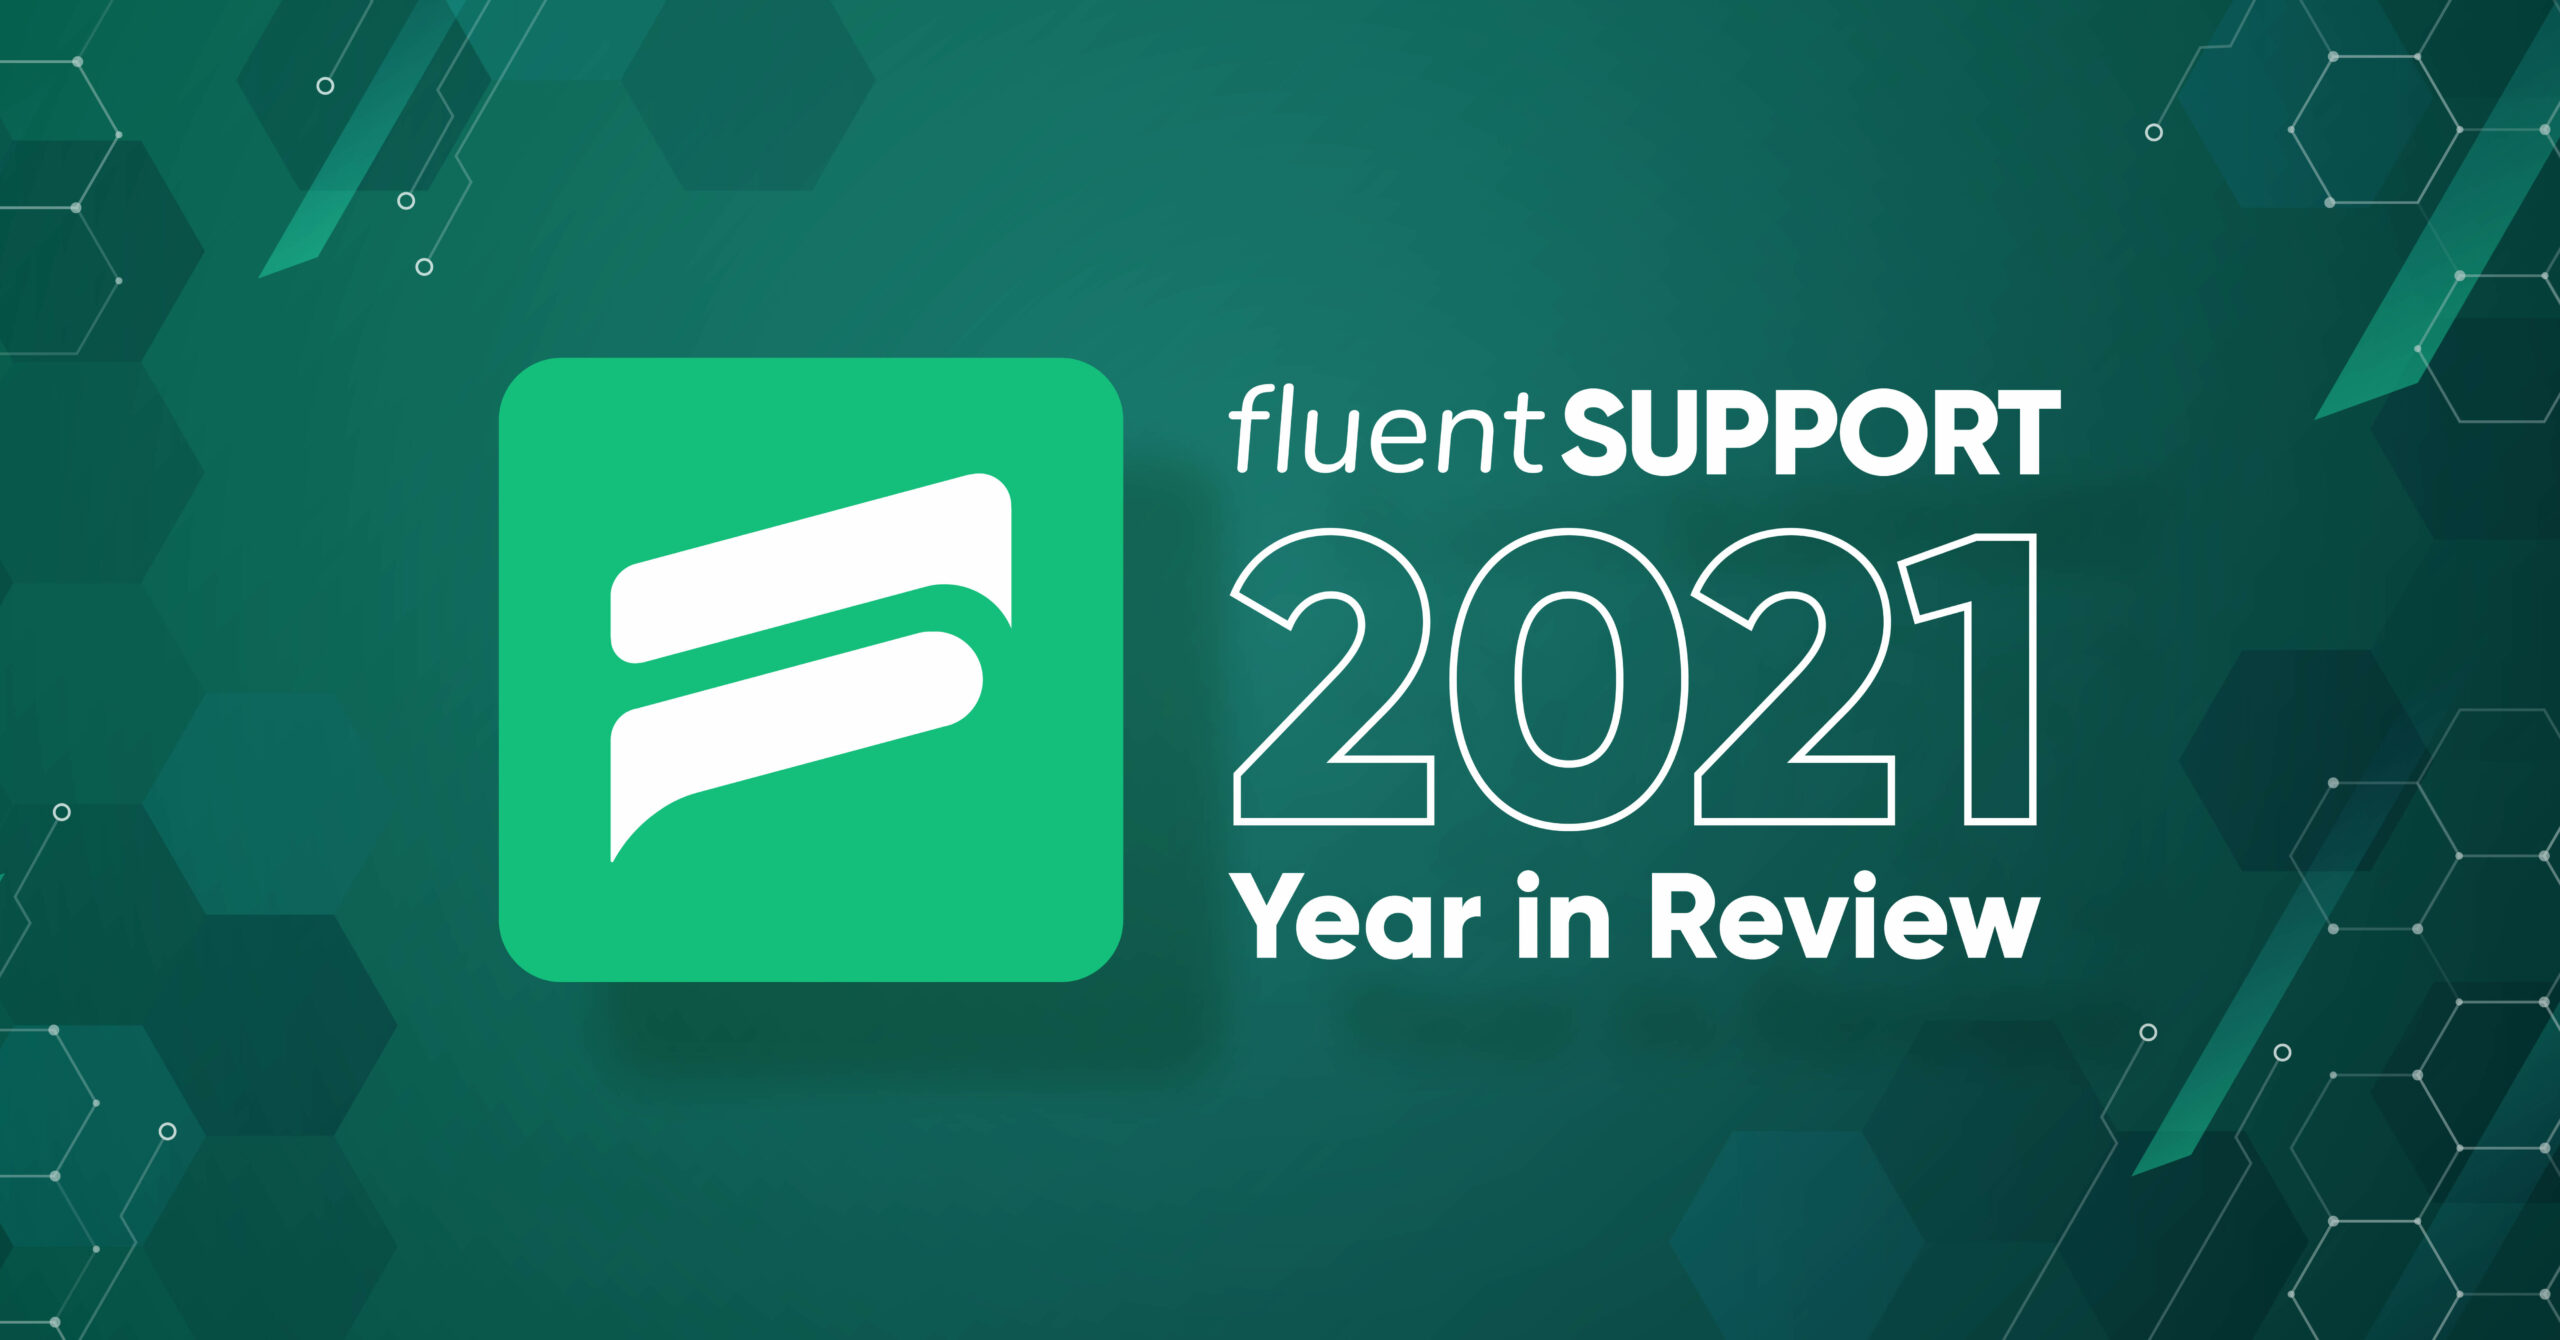 Fluent Support: Looking Back to 2021